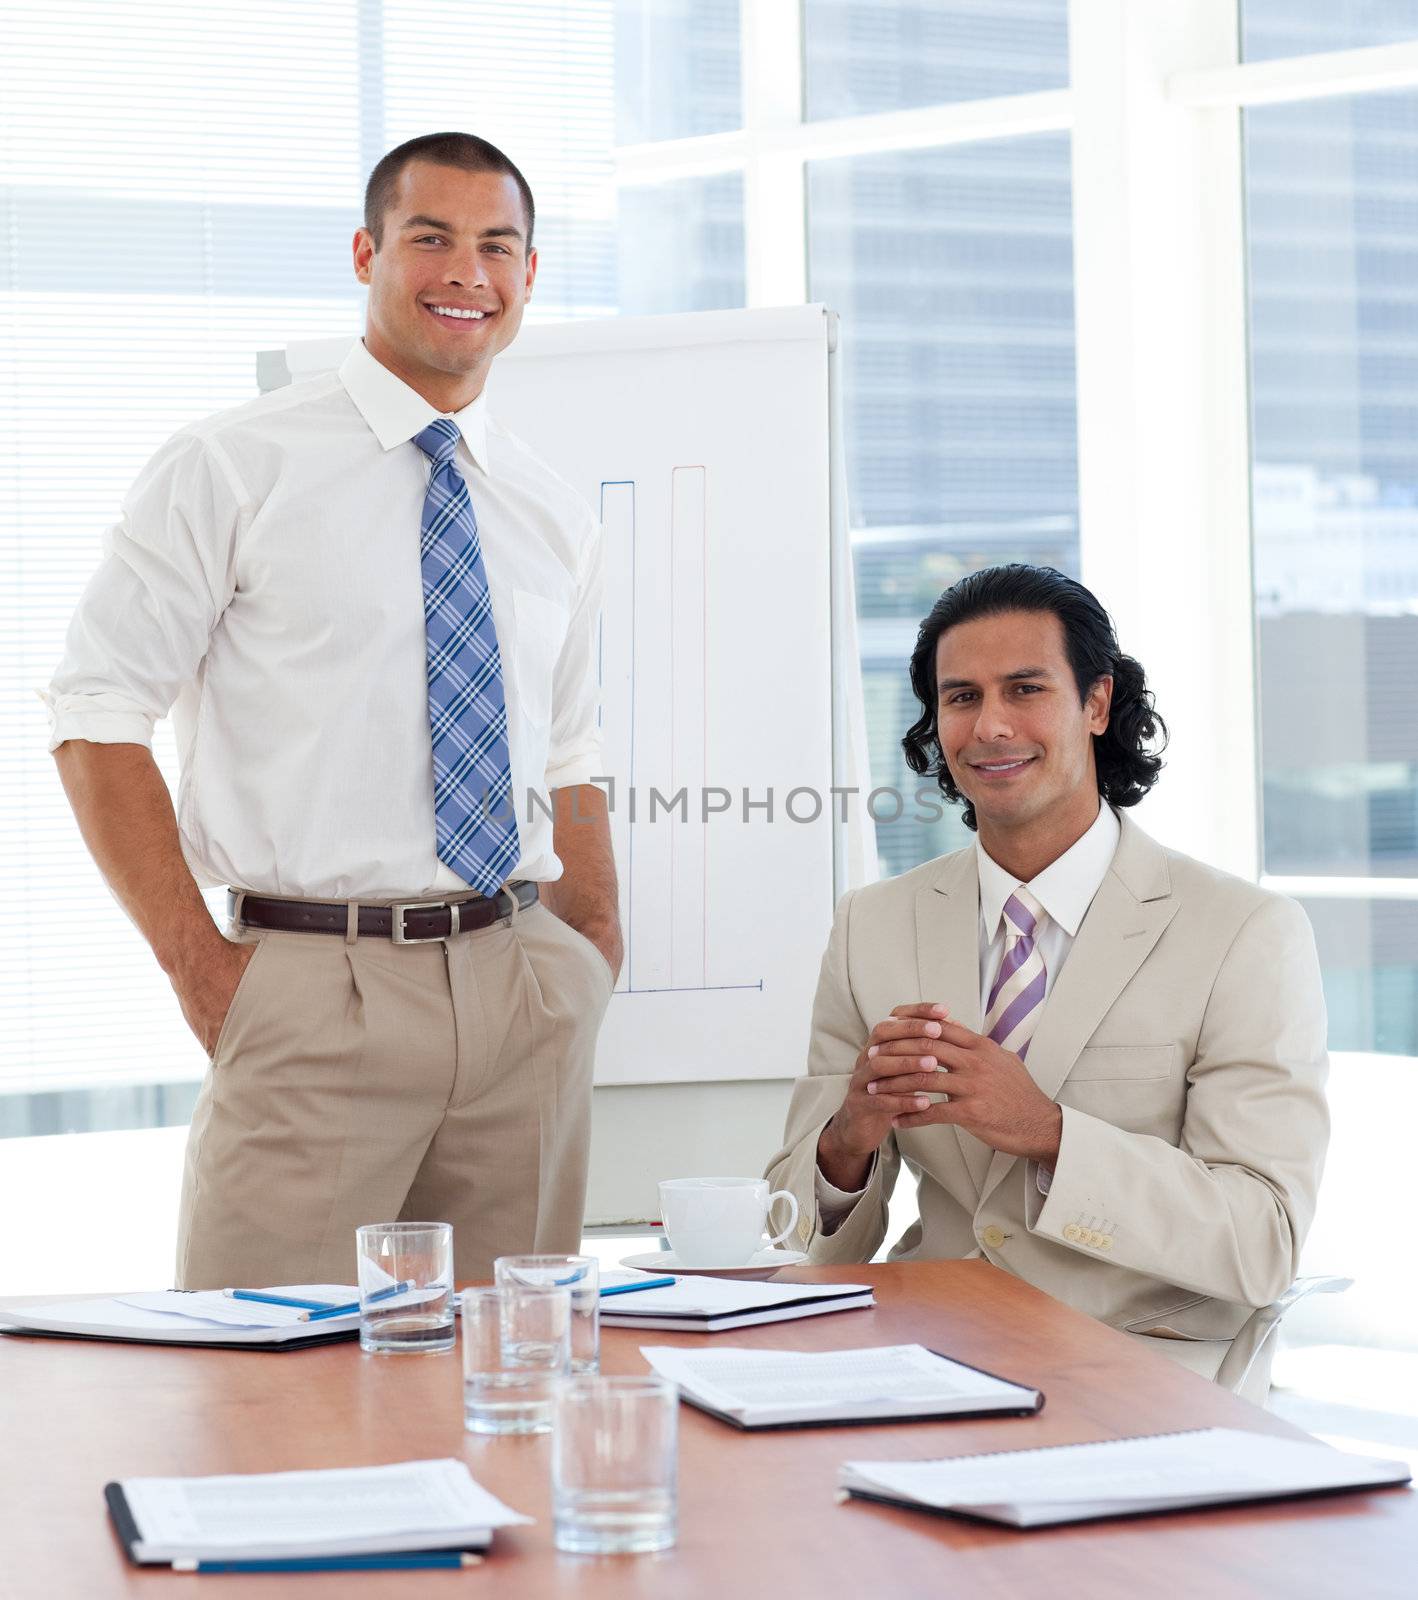 Smiling businessman giving a presentation in a company